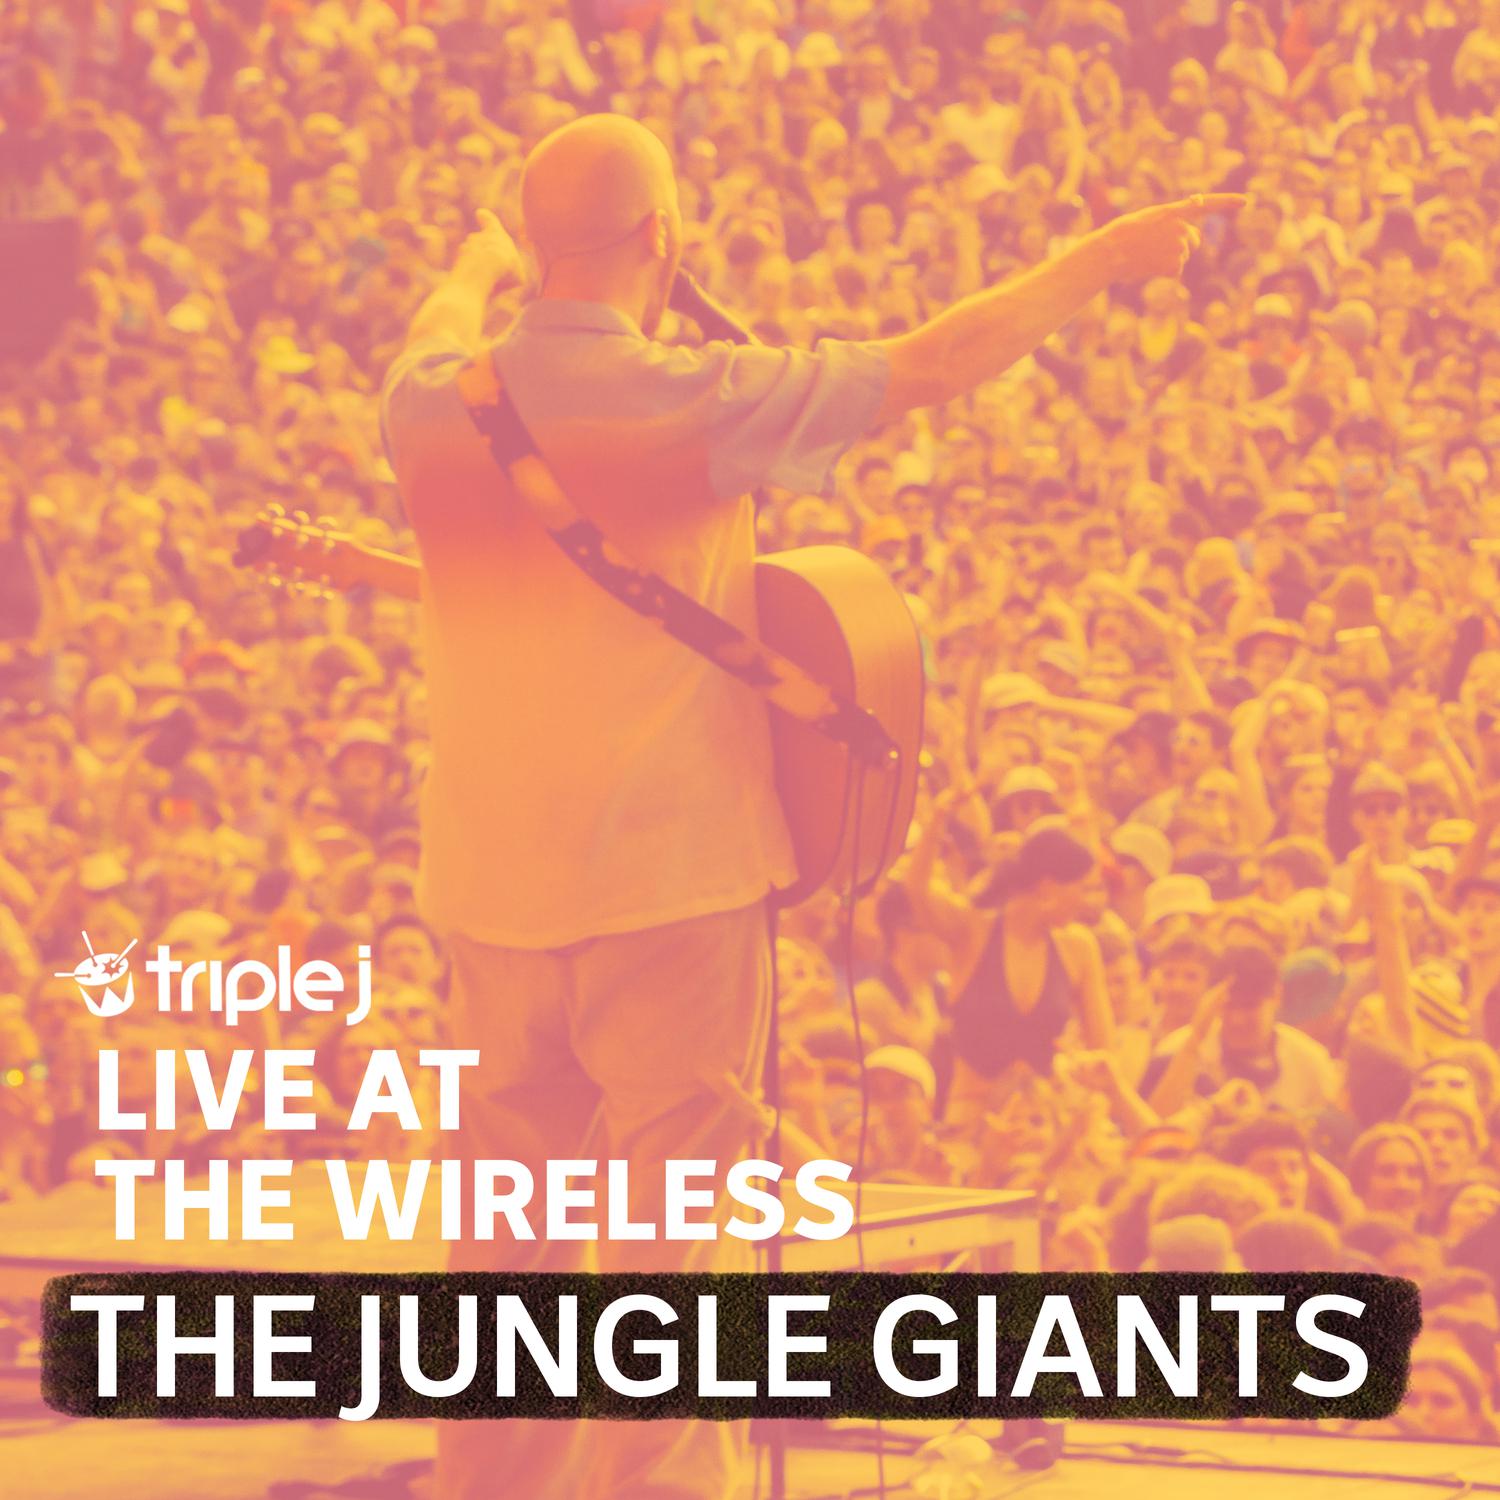 The Jungle Giants - Treat You Right (triple j Live At The Wireless)